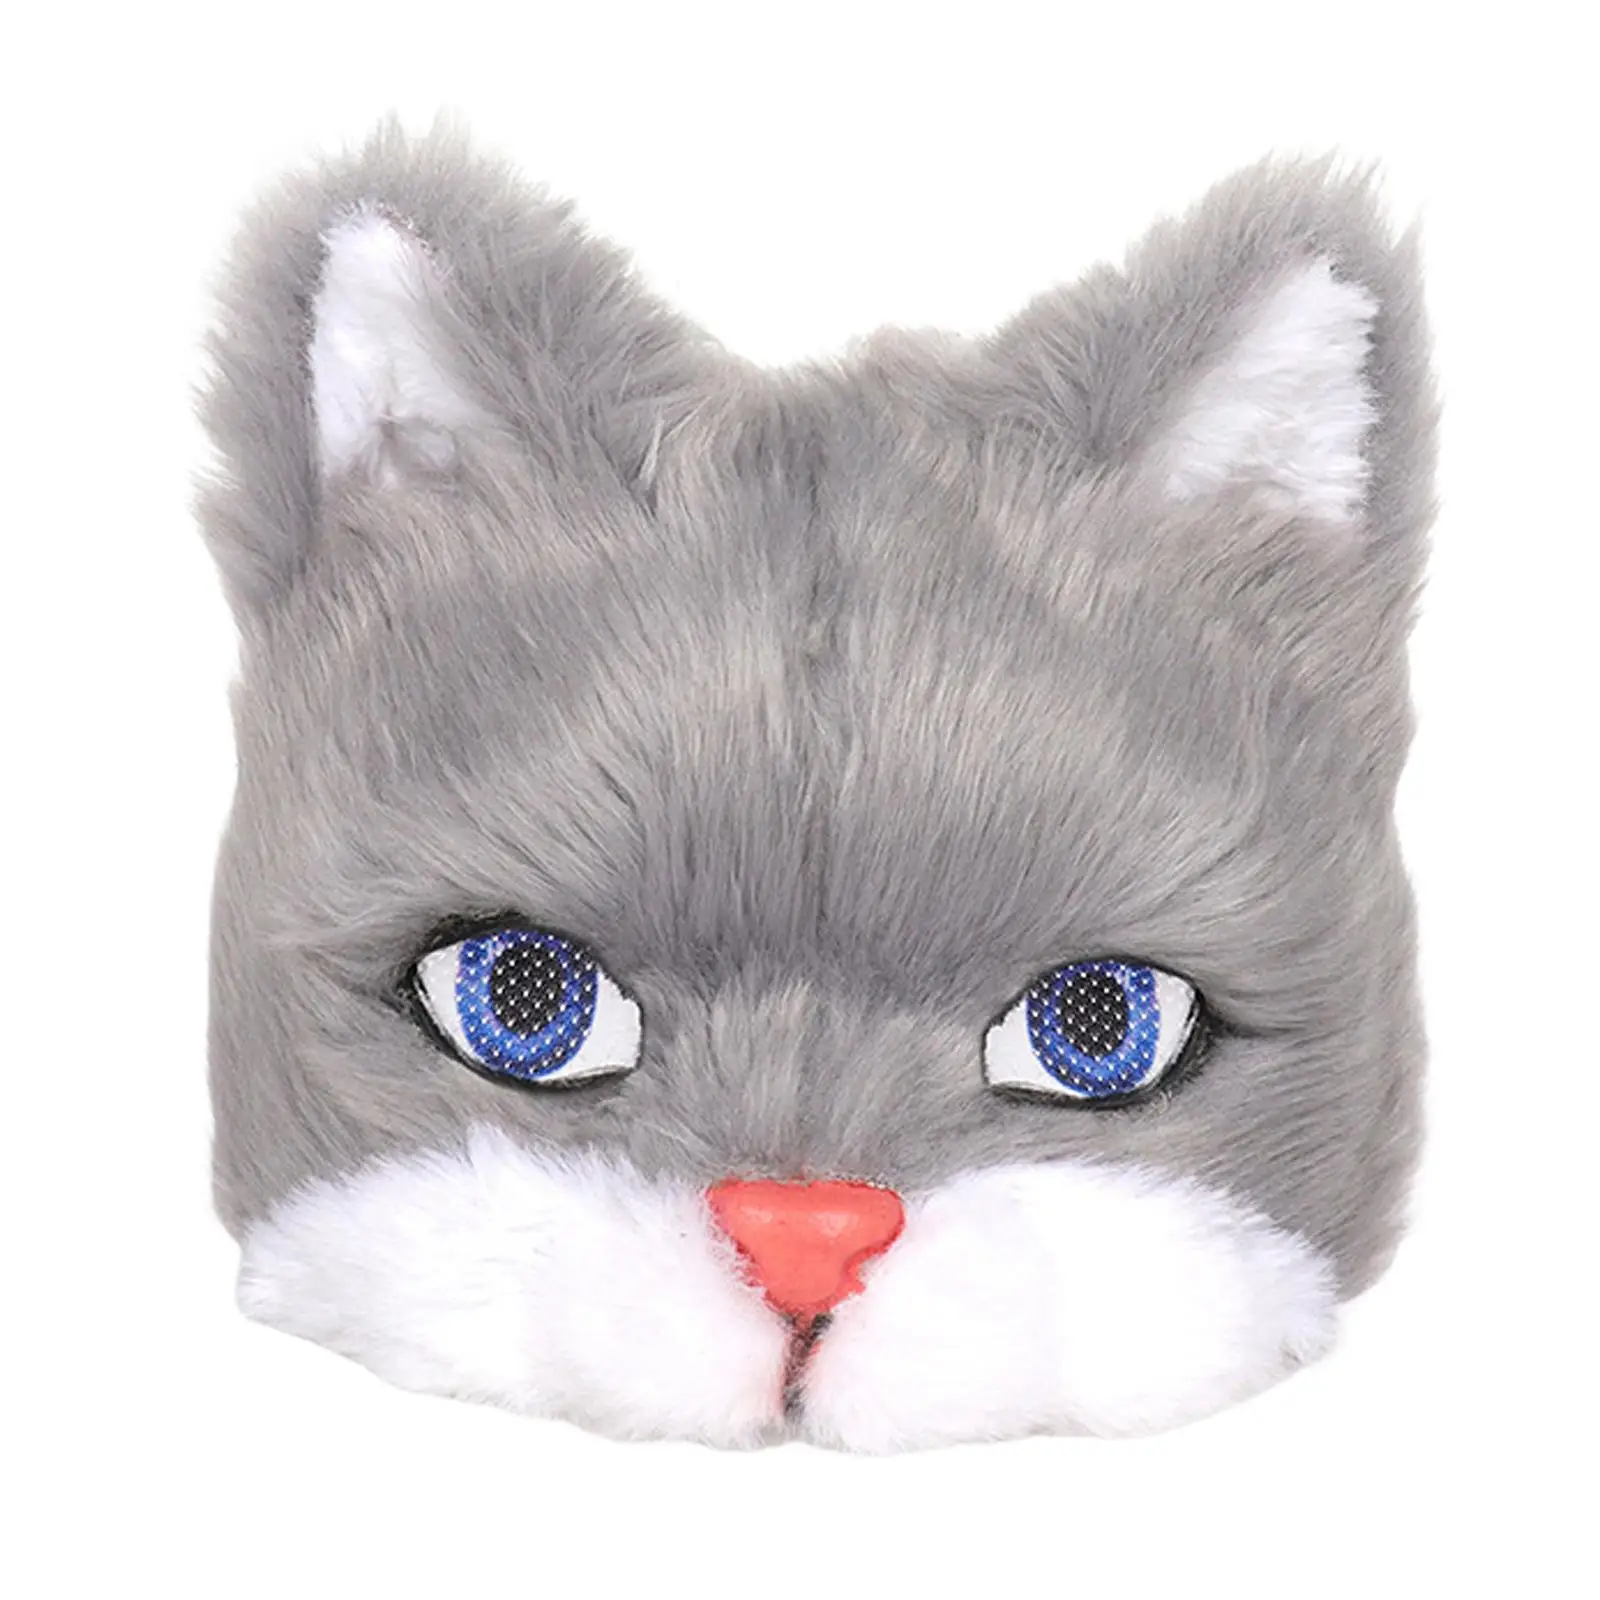 Cat Mask Female Half Face for Kids Adults Simulation Mask for Festival Stage Performance Cosplay Costume